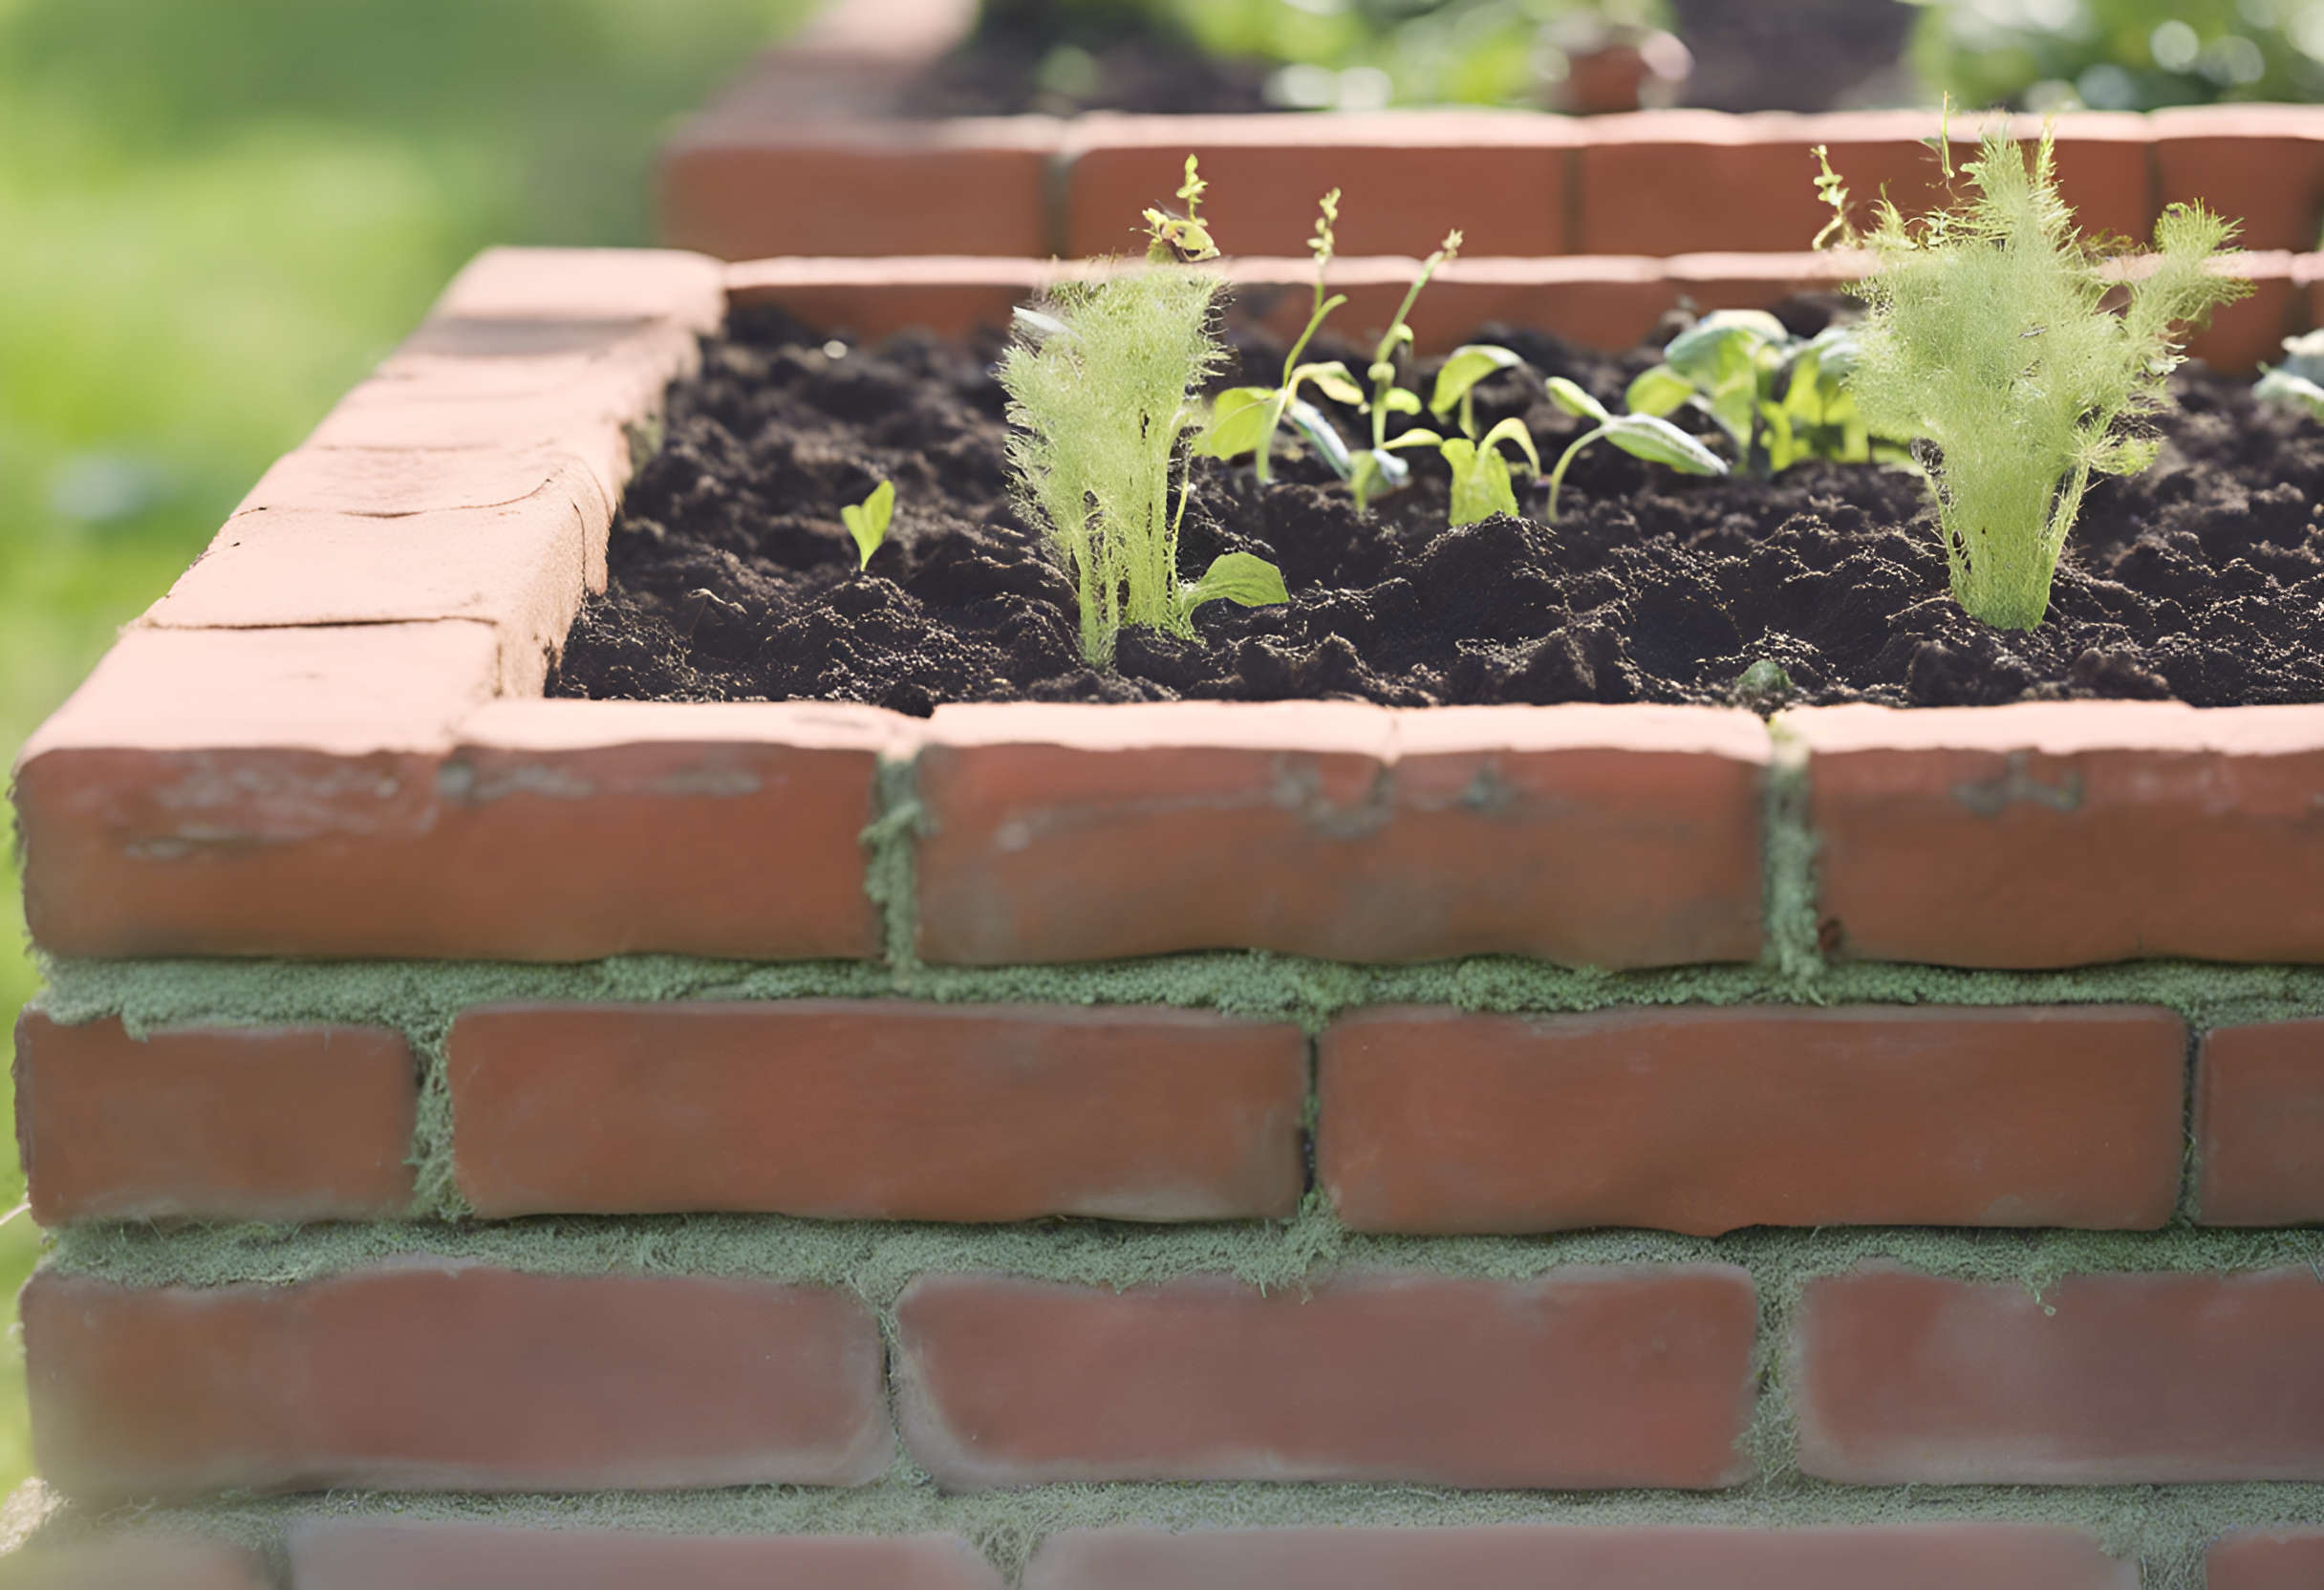 What Is the Point of Raised Beds? - Brick raised bed